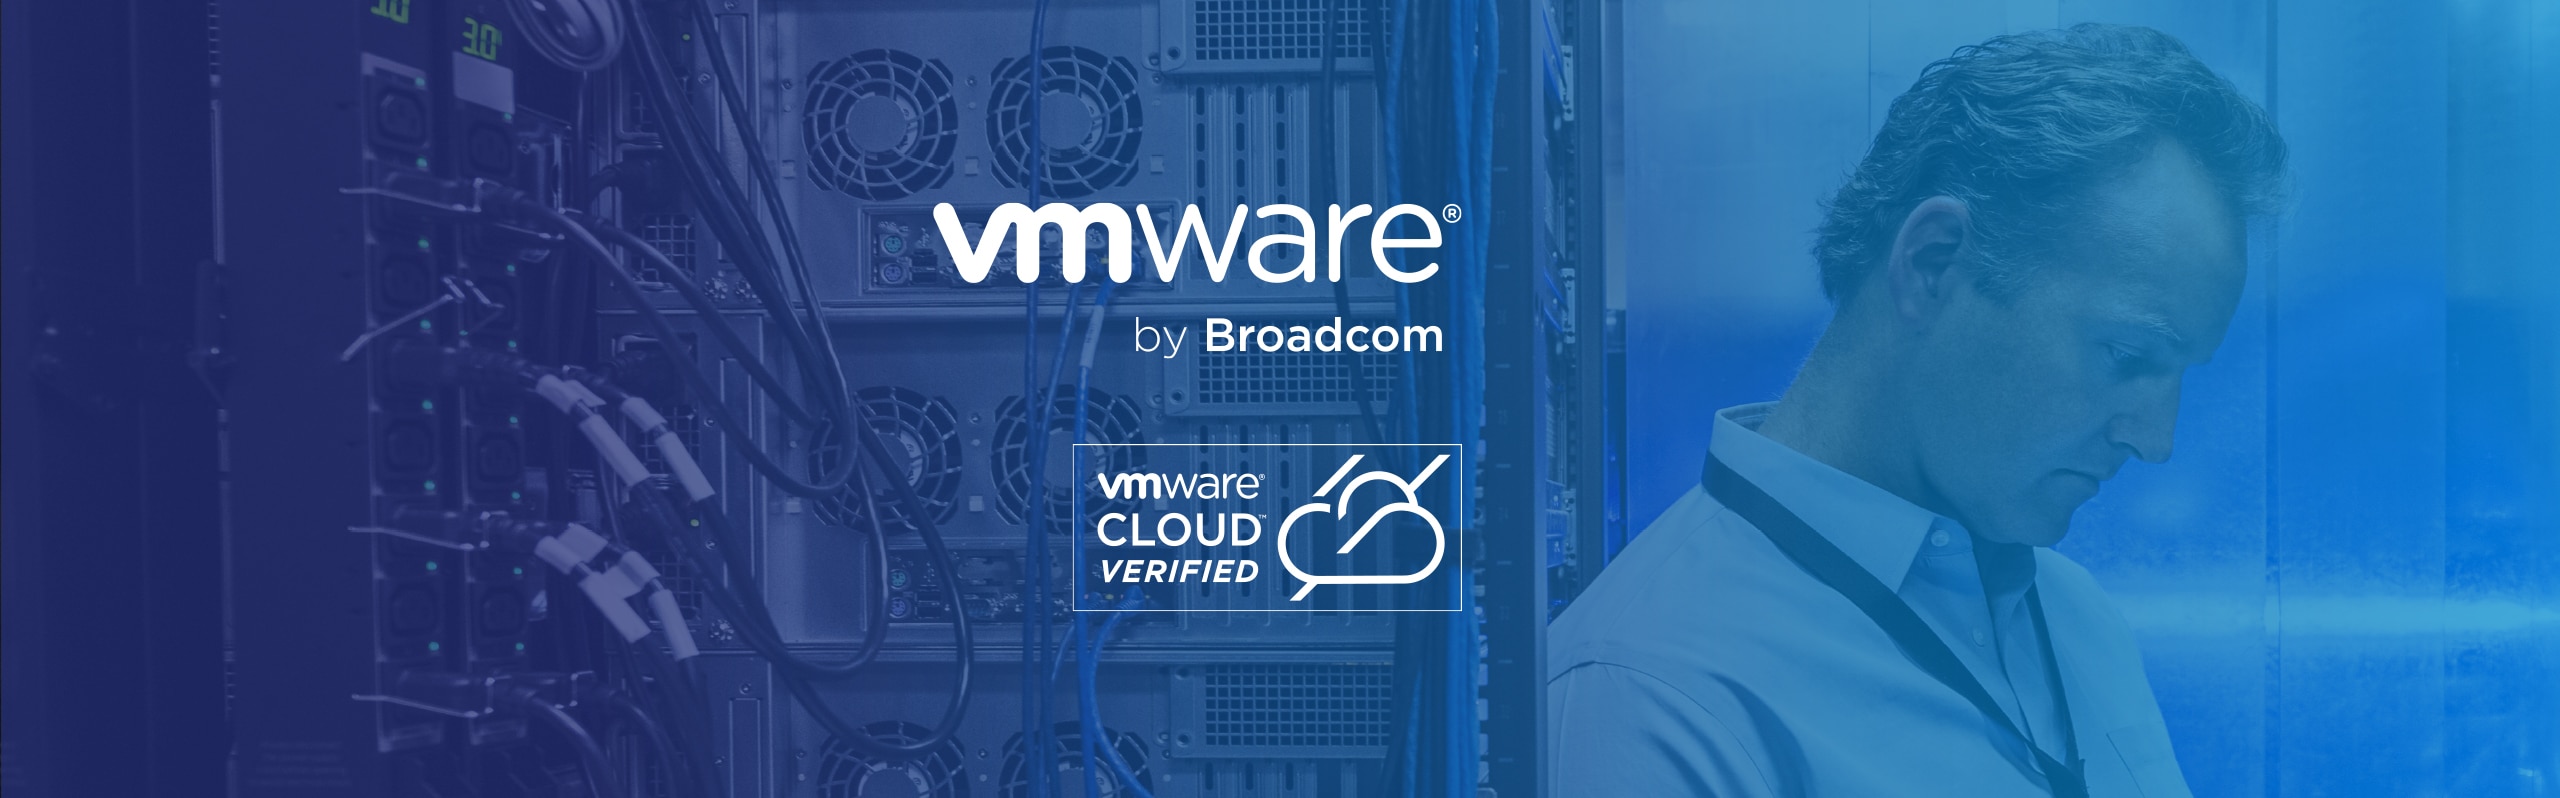 VMware by Broadcom White Label Solution by Atomic Data